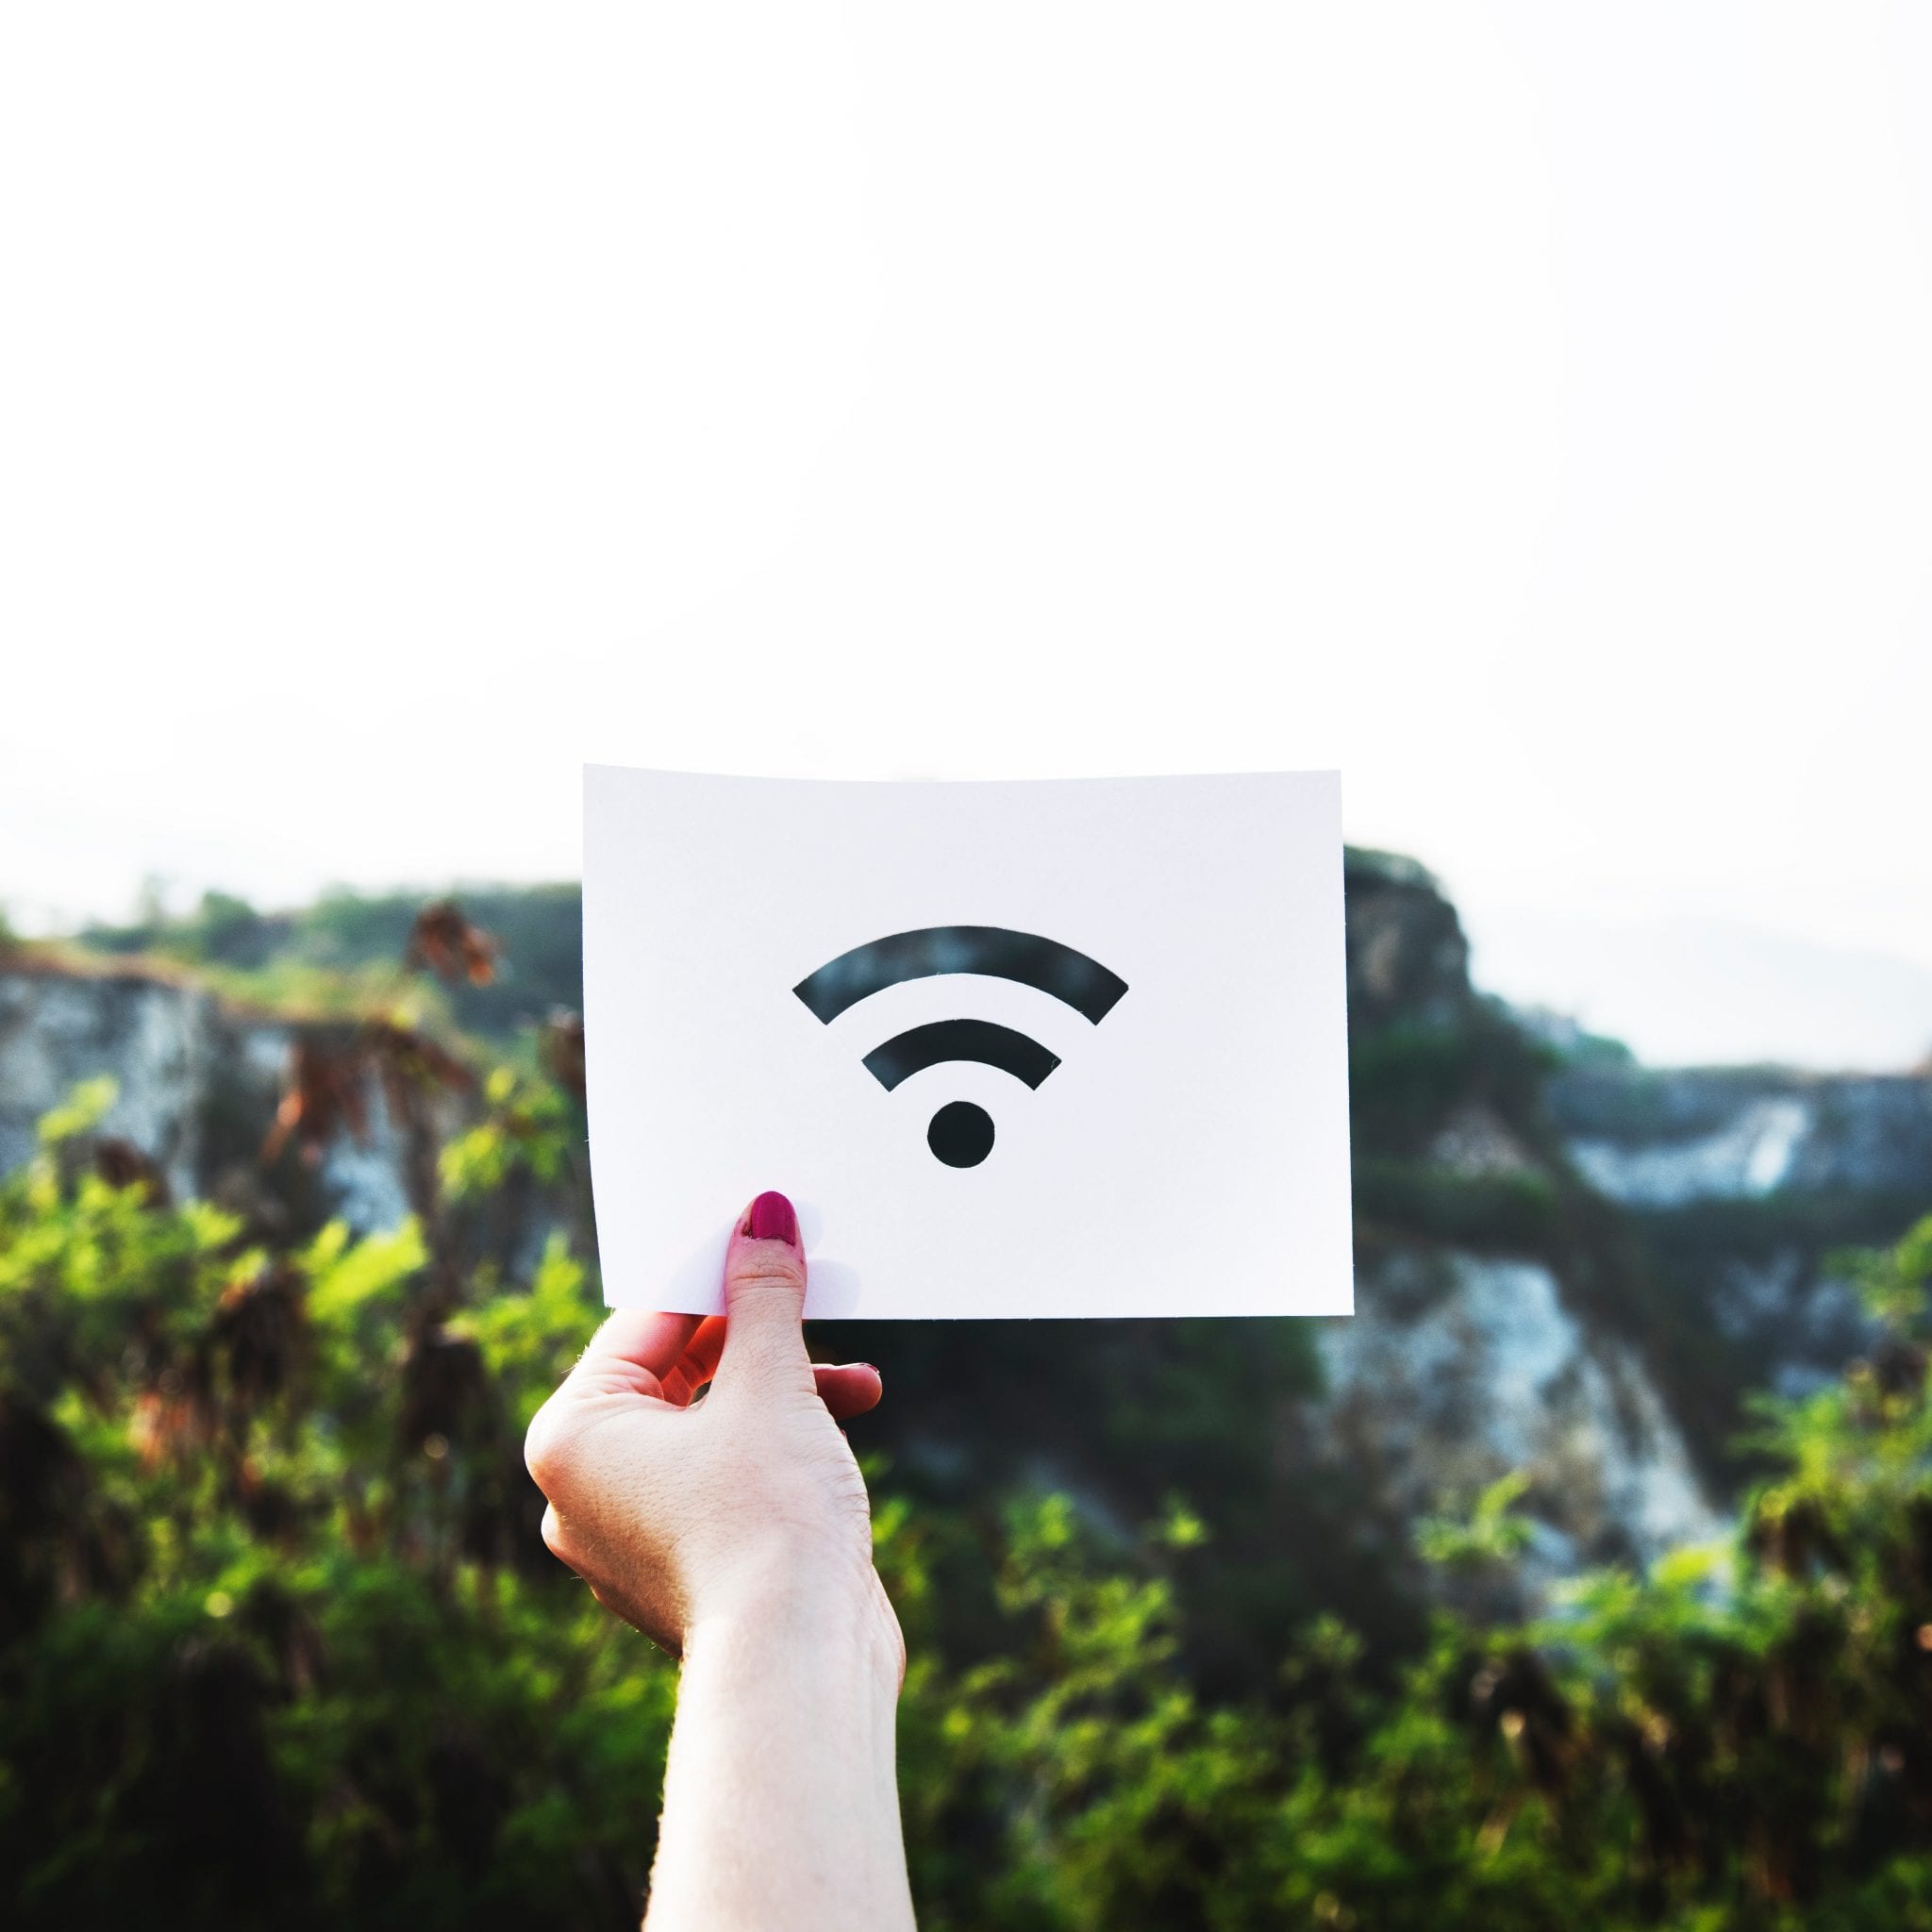 Location Matters when it comes to WiFi Signal Strength - LG Networks